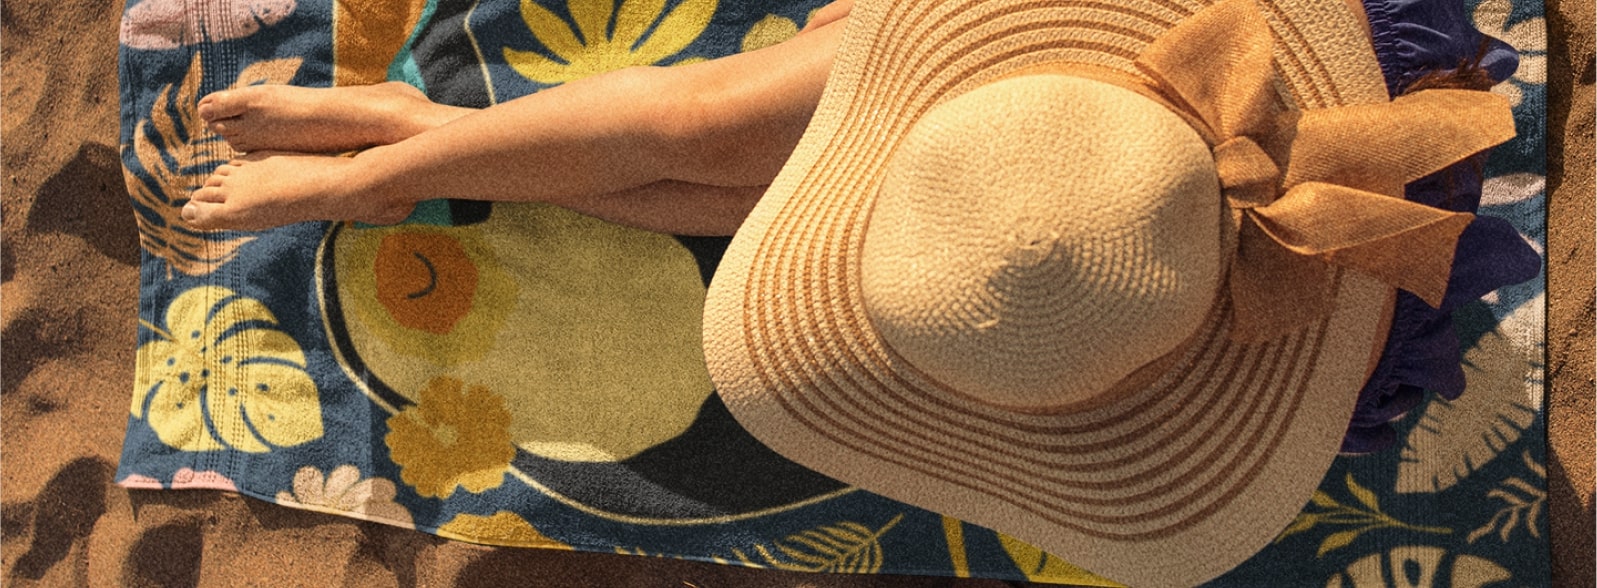 Top view of a woman wearing a straw hat on a beach